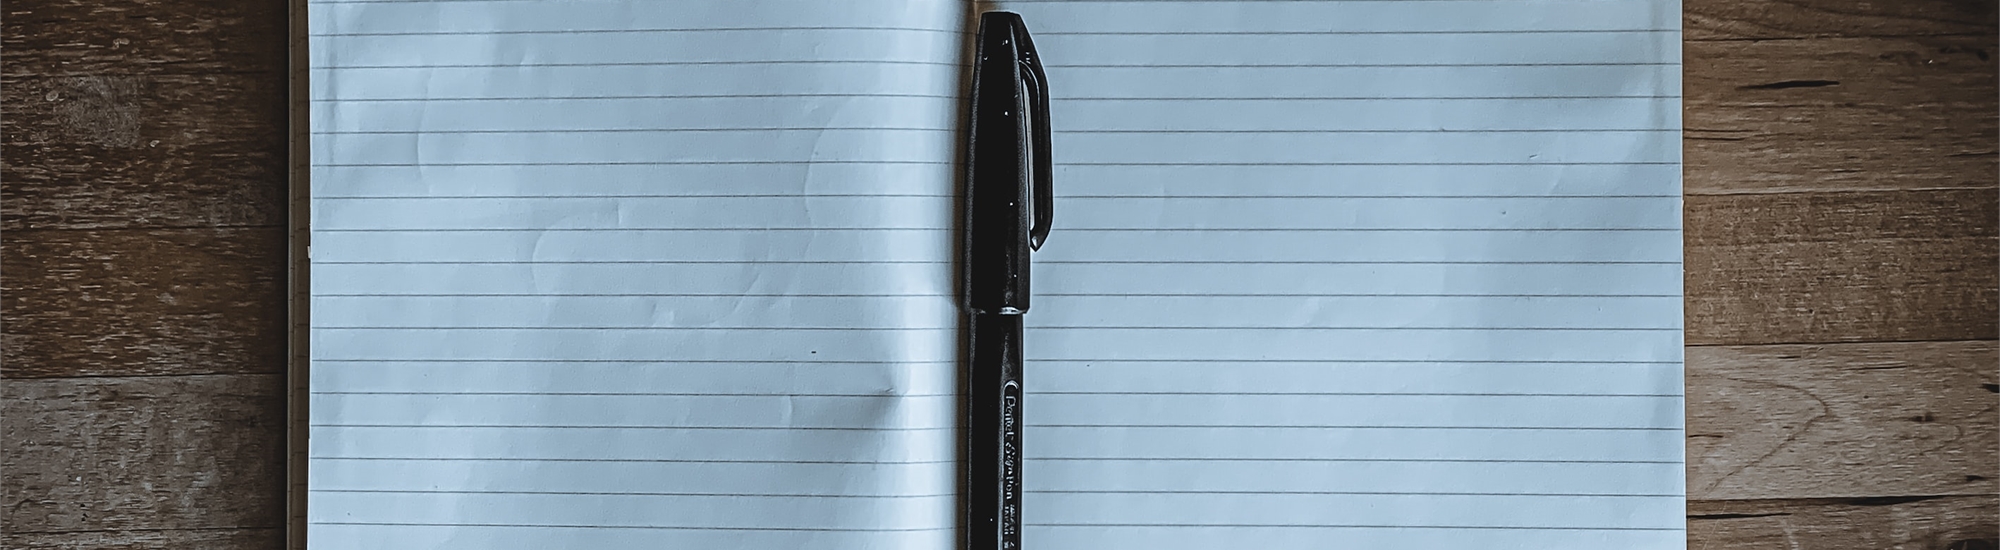 A notepad and pen